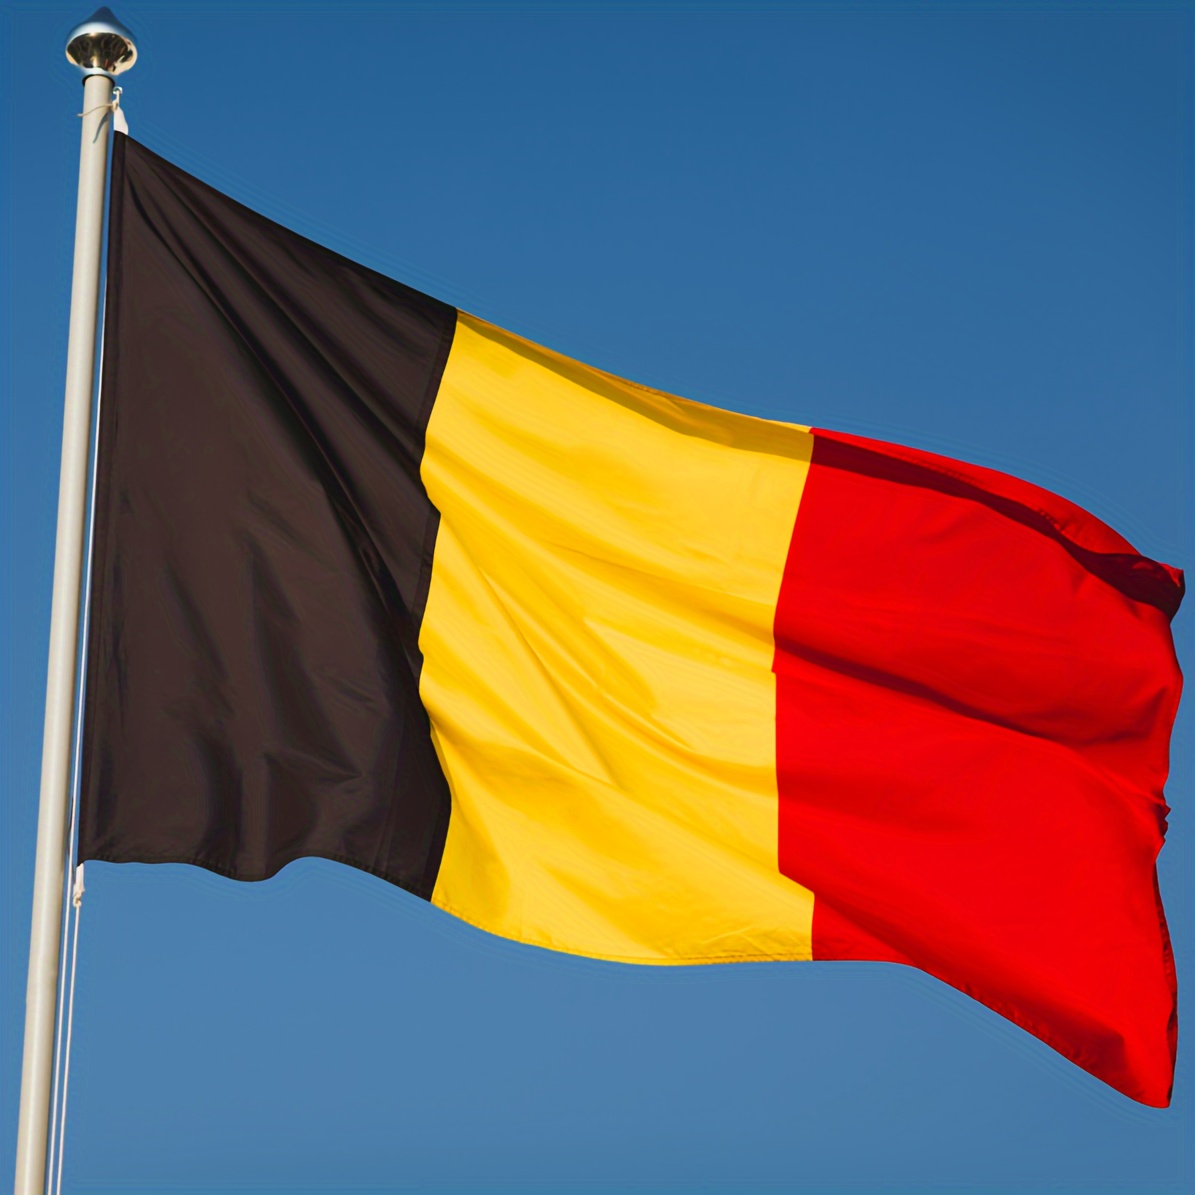 

Belgium National Flag - 3x5 Ft Durable Polyester, Vibrant Digital Print With Grommets For Outdoor Display (flagpole Not Included)